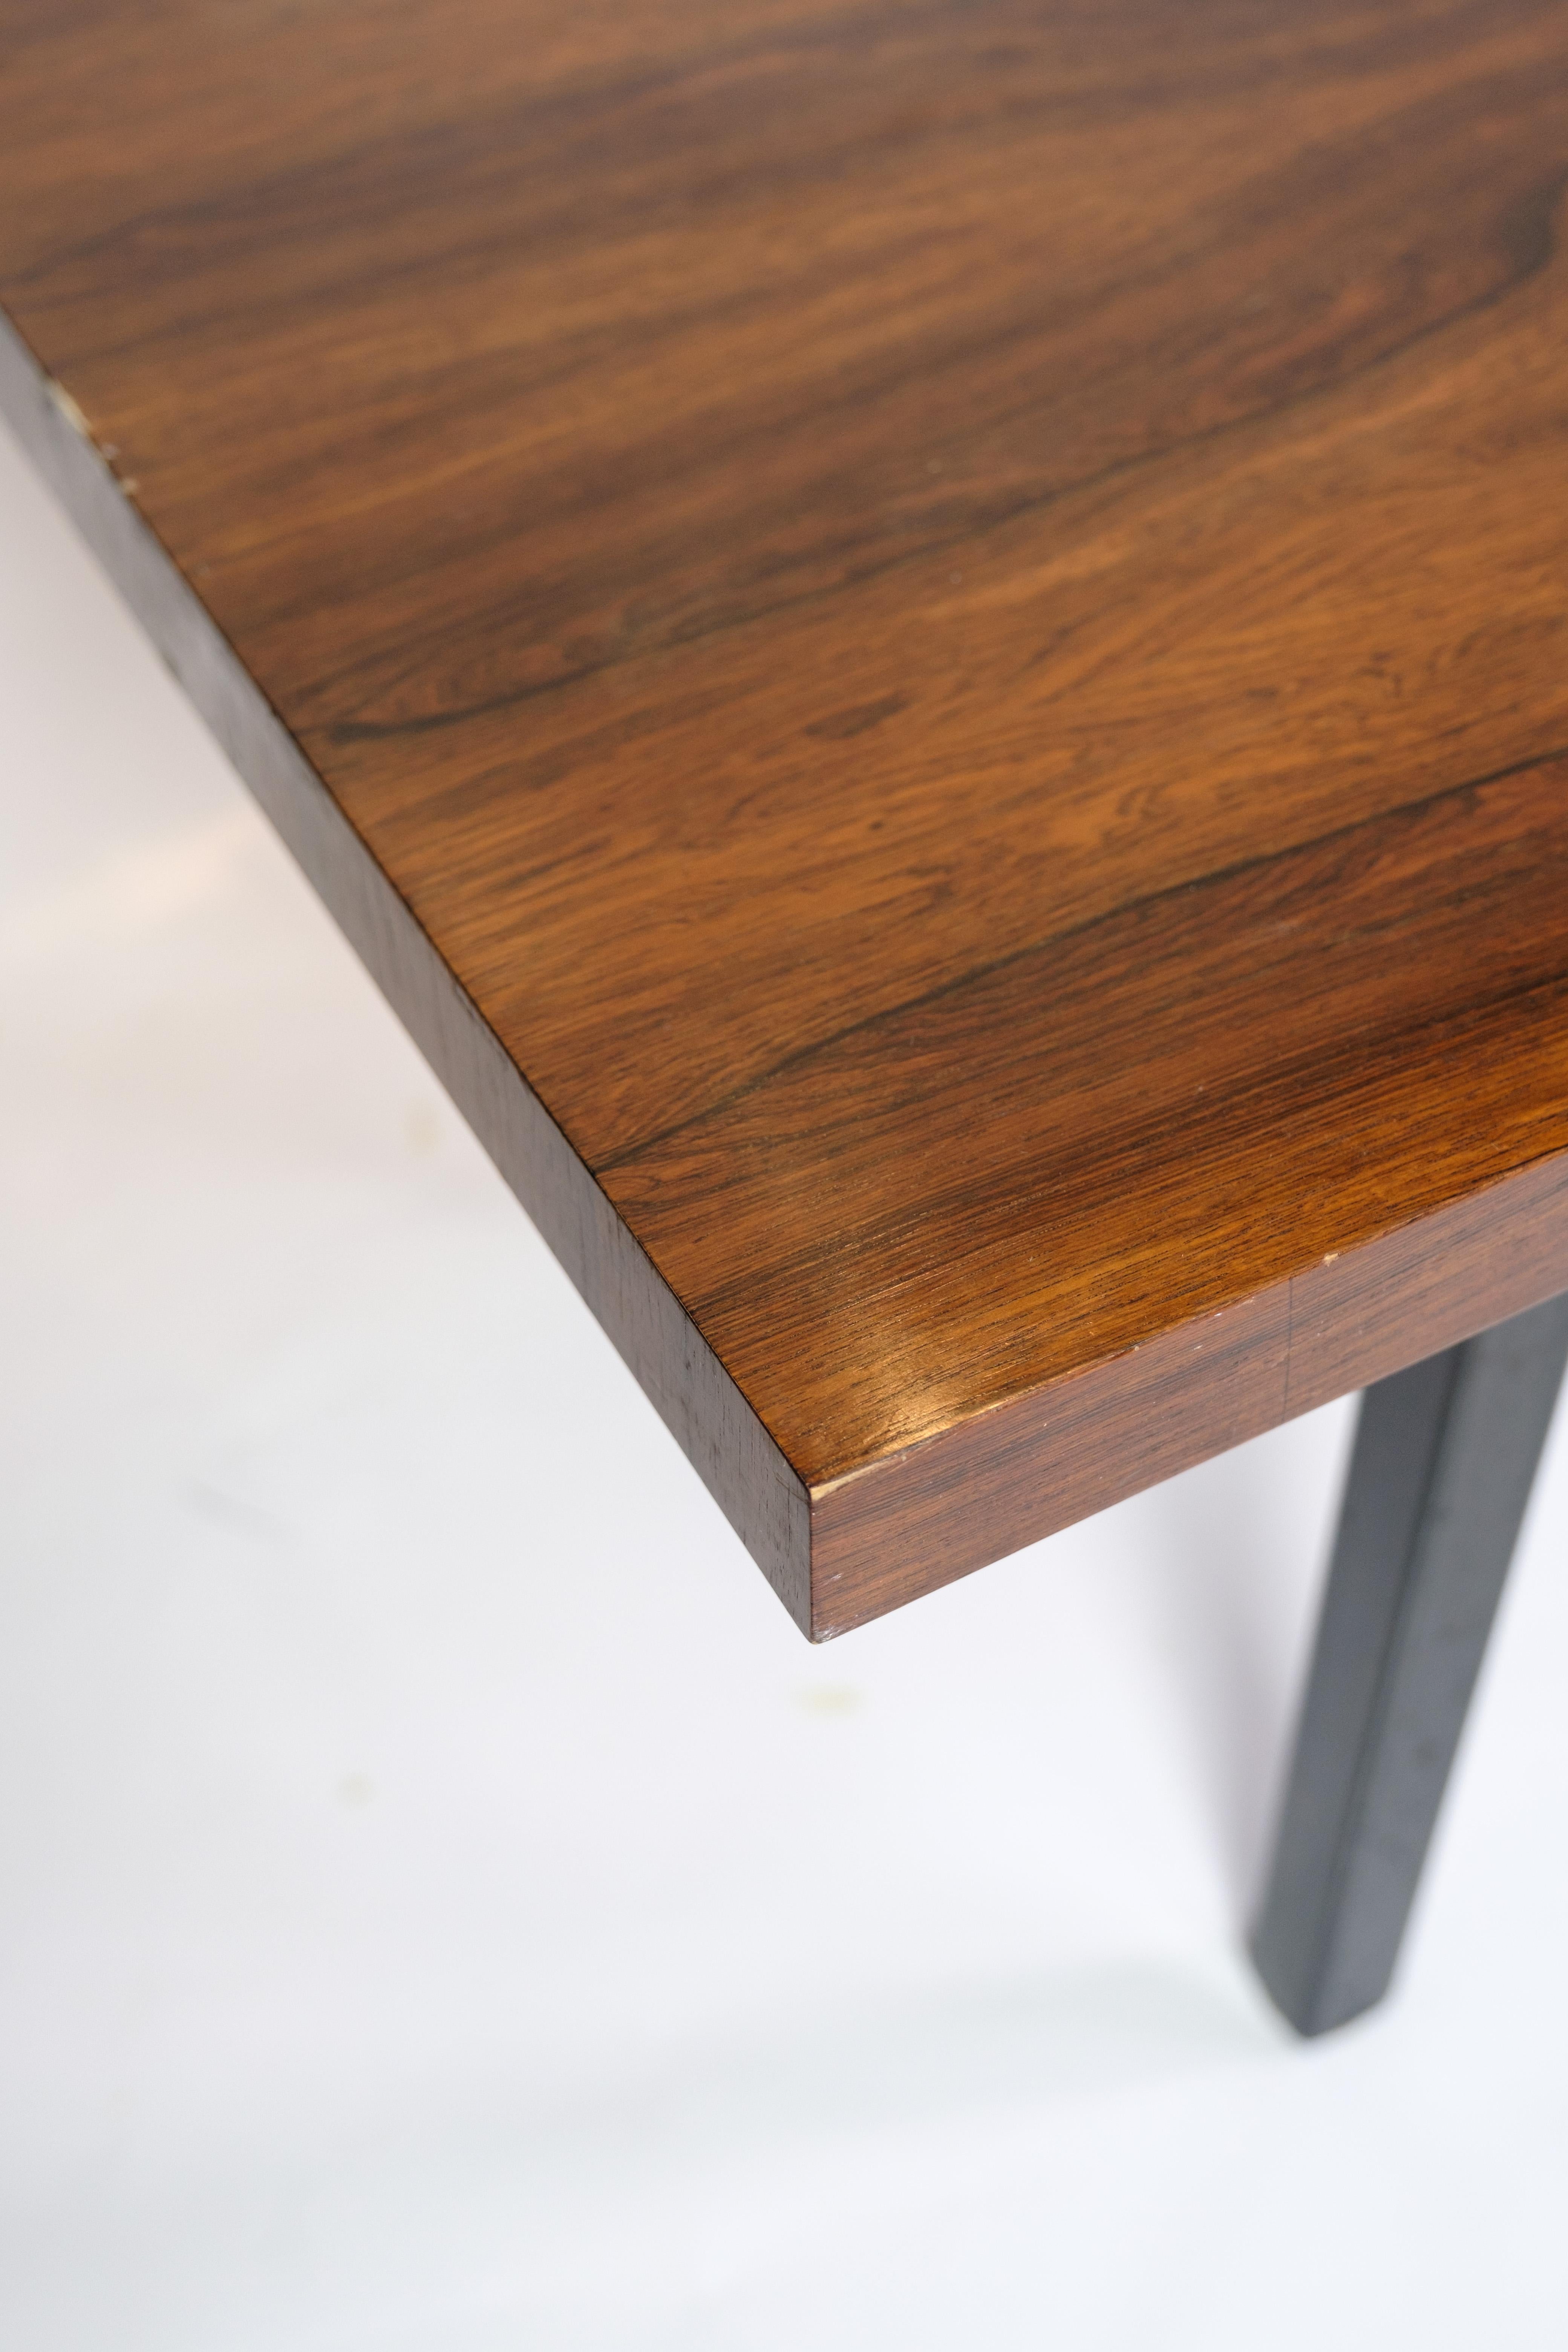 Mid-20th Century Coffee Table Made In Rosewood, Danish Design From 1960s For Sale